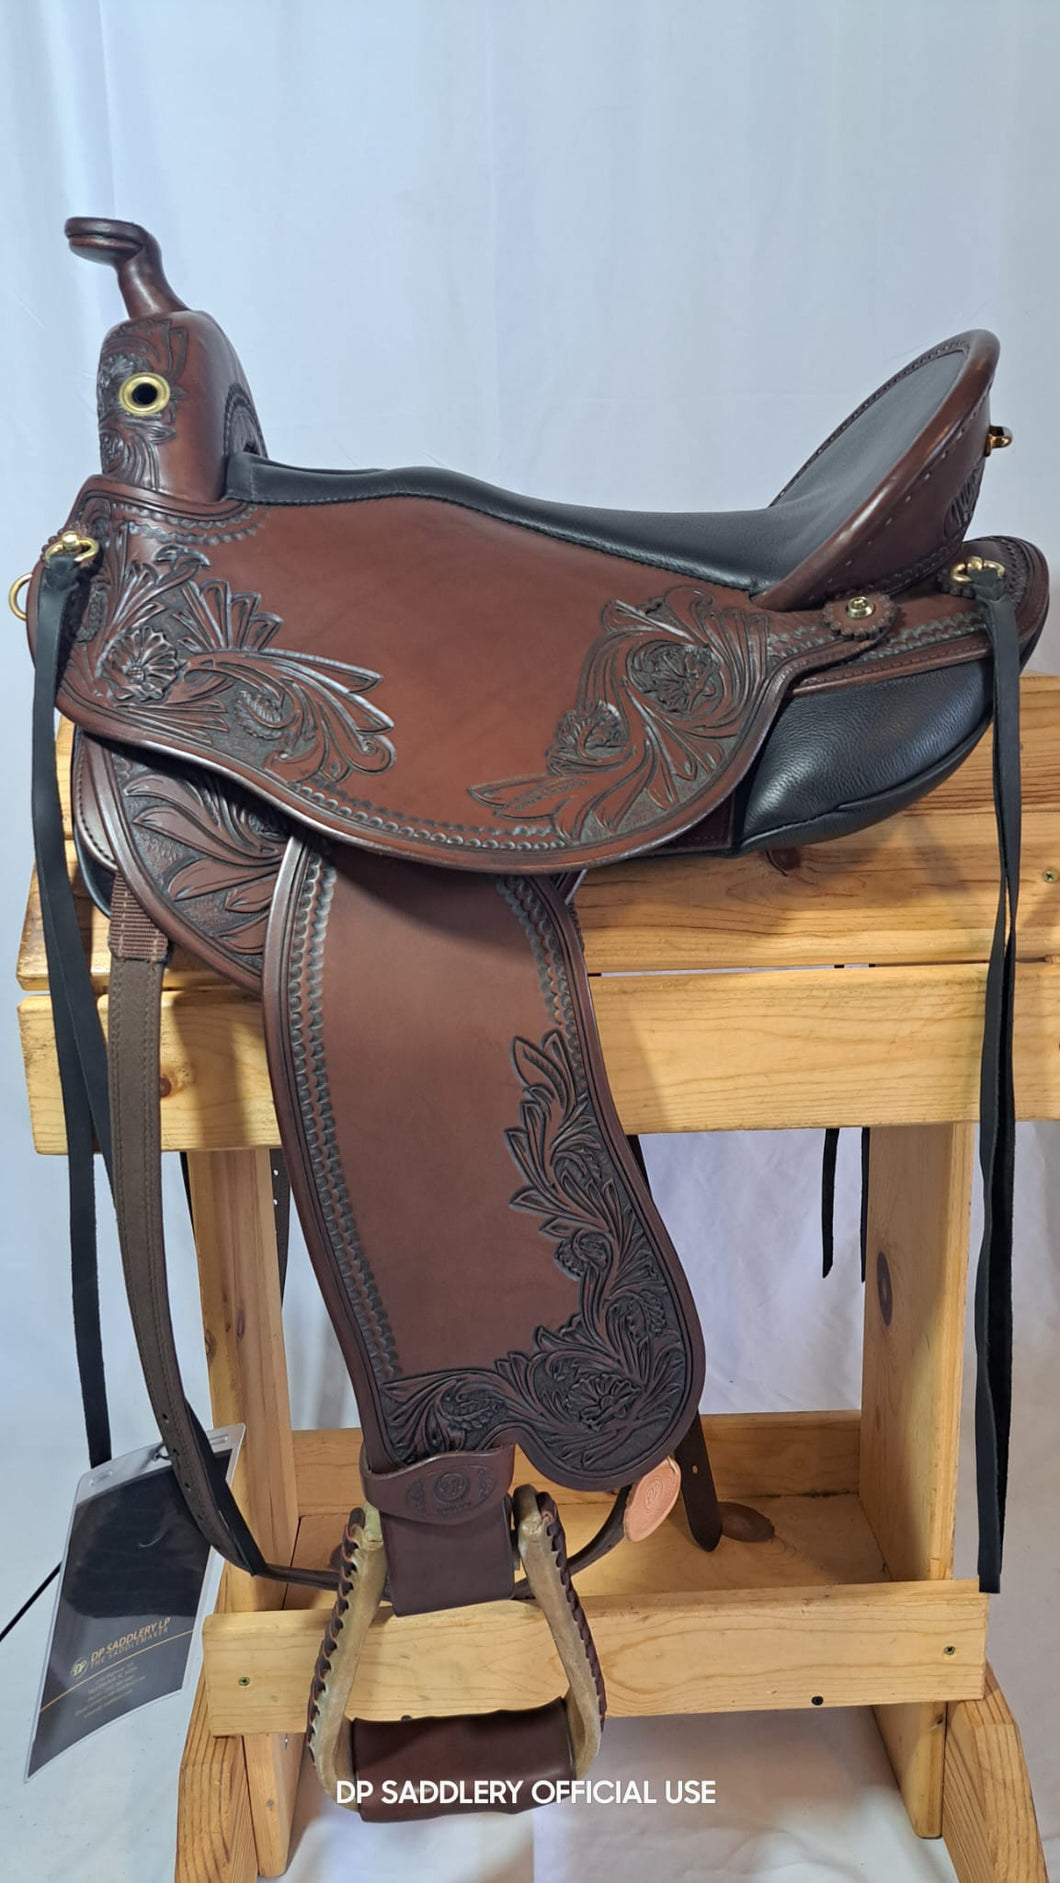 dp saddlery quantum short and light western with western dressage seat 6617, side view on a wooden saddle rack, white background